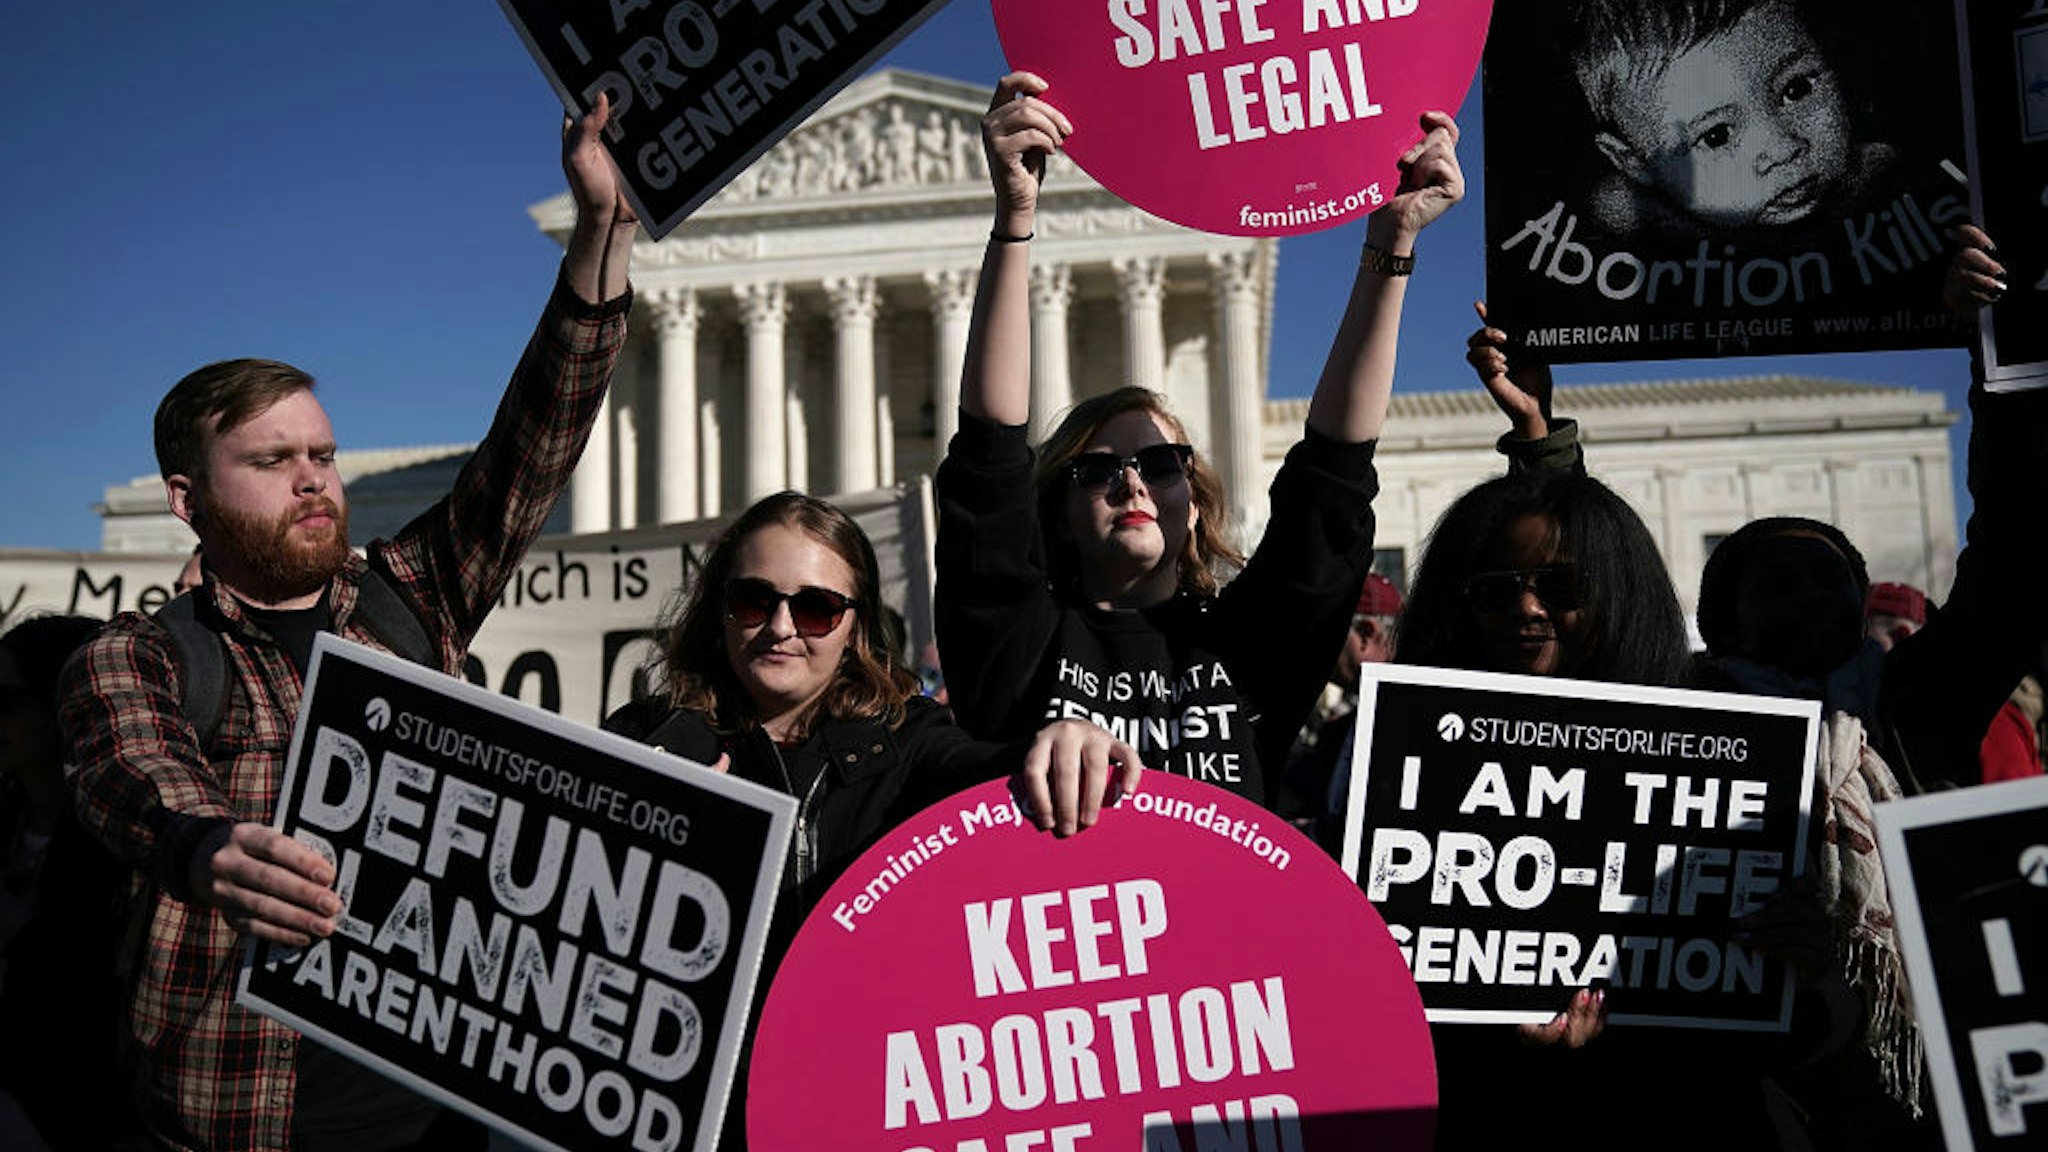 WASHINGTON, DC - JANUARY 19: Pro-life activists try to block the signs of pro-choice activists in front of the the U.S. Supreme Court during the 2018 March for Life January 19, 2018 in Washington, DC. Activists gathered in the nation's capital for the annual event to mark the anniversary of the Supreme Court Roe v. Wade ruling that legalized abortion in 1973. (Photo by Alex Wong/Getty Images)